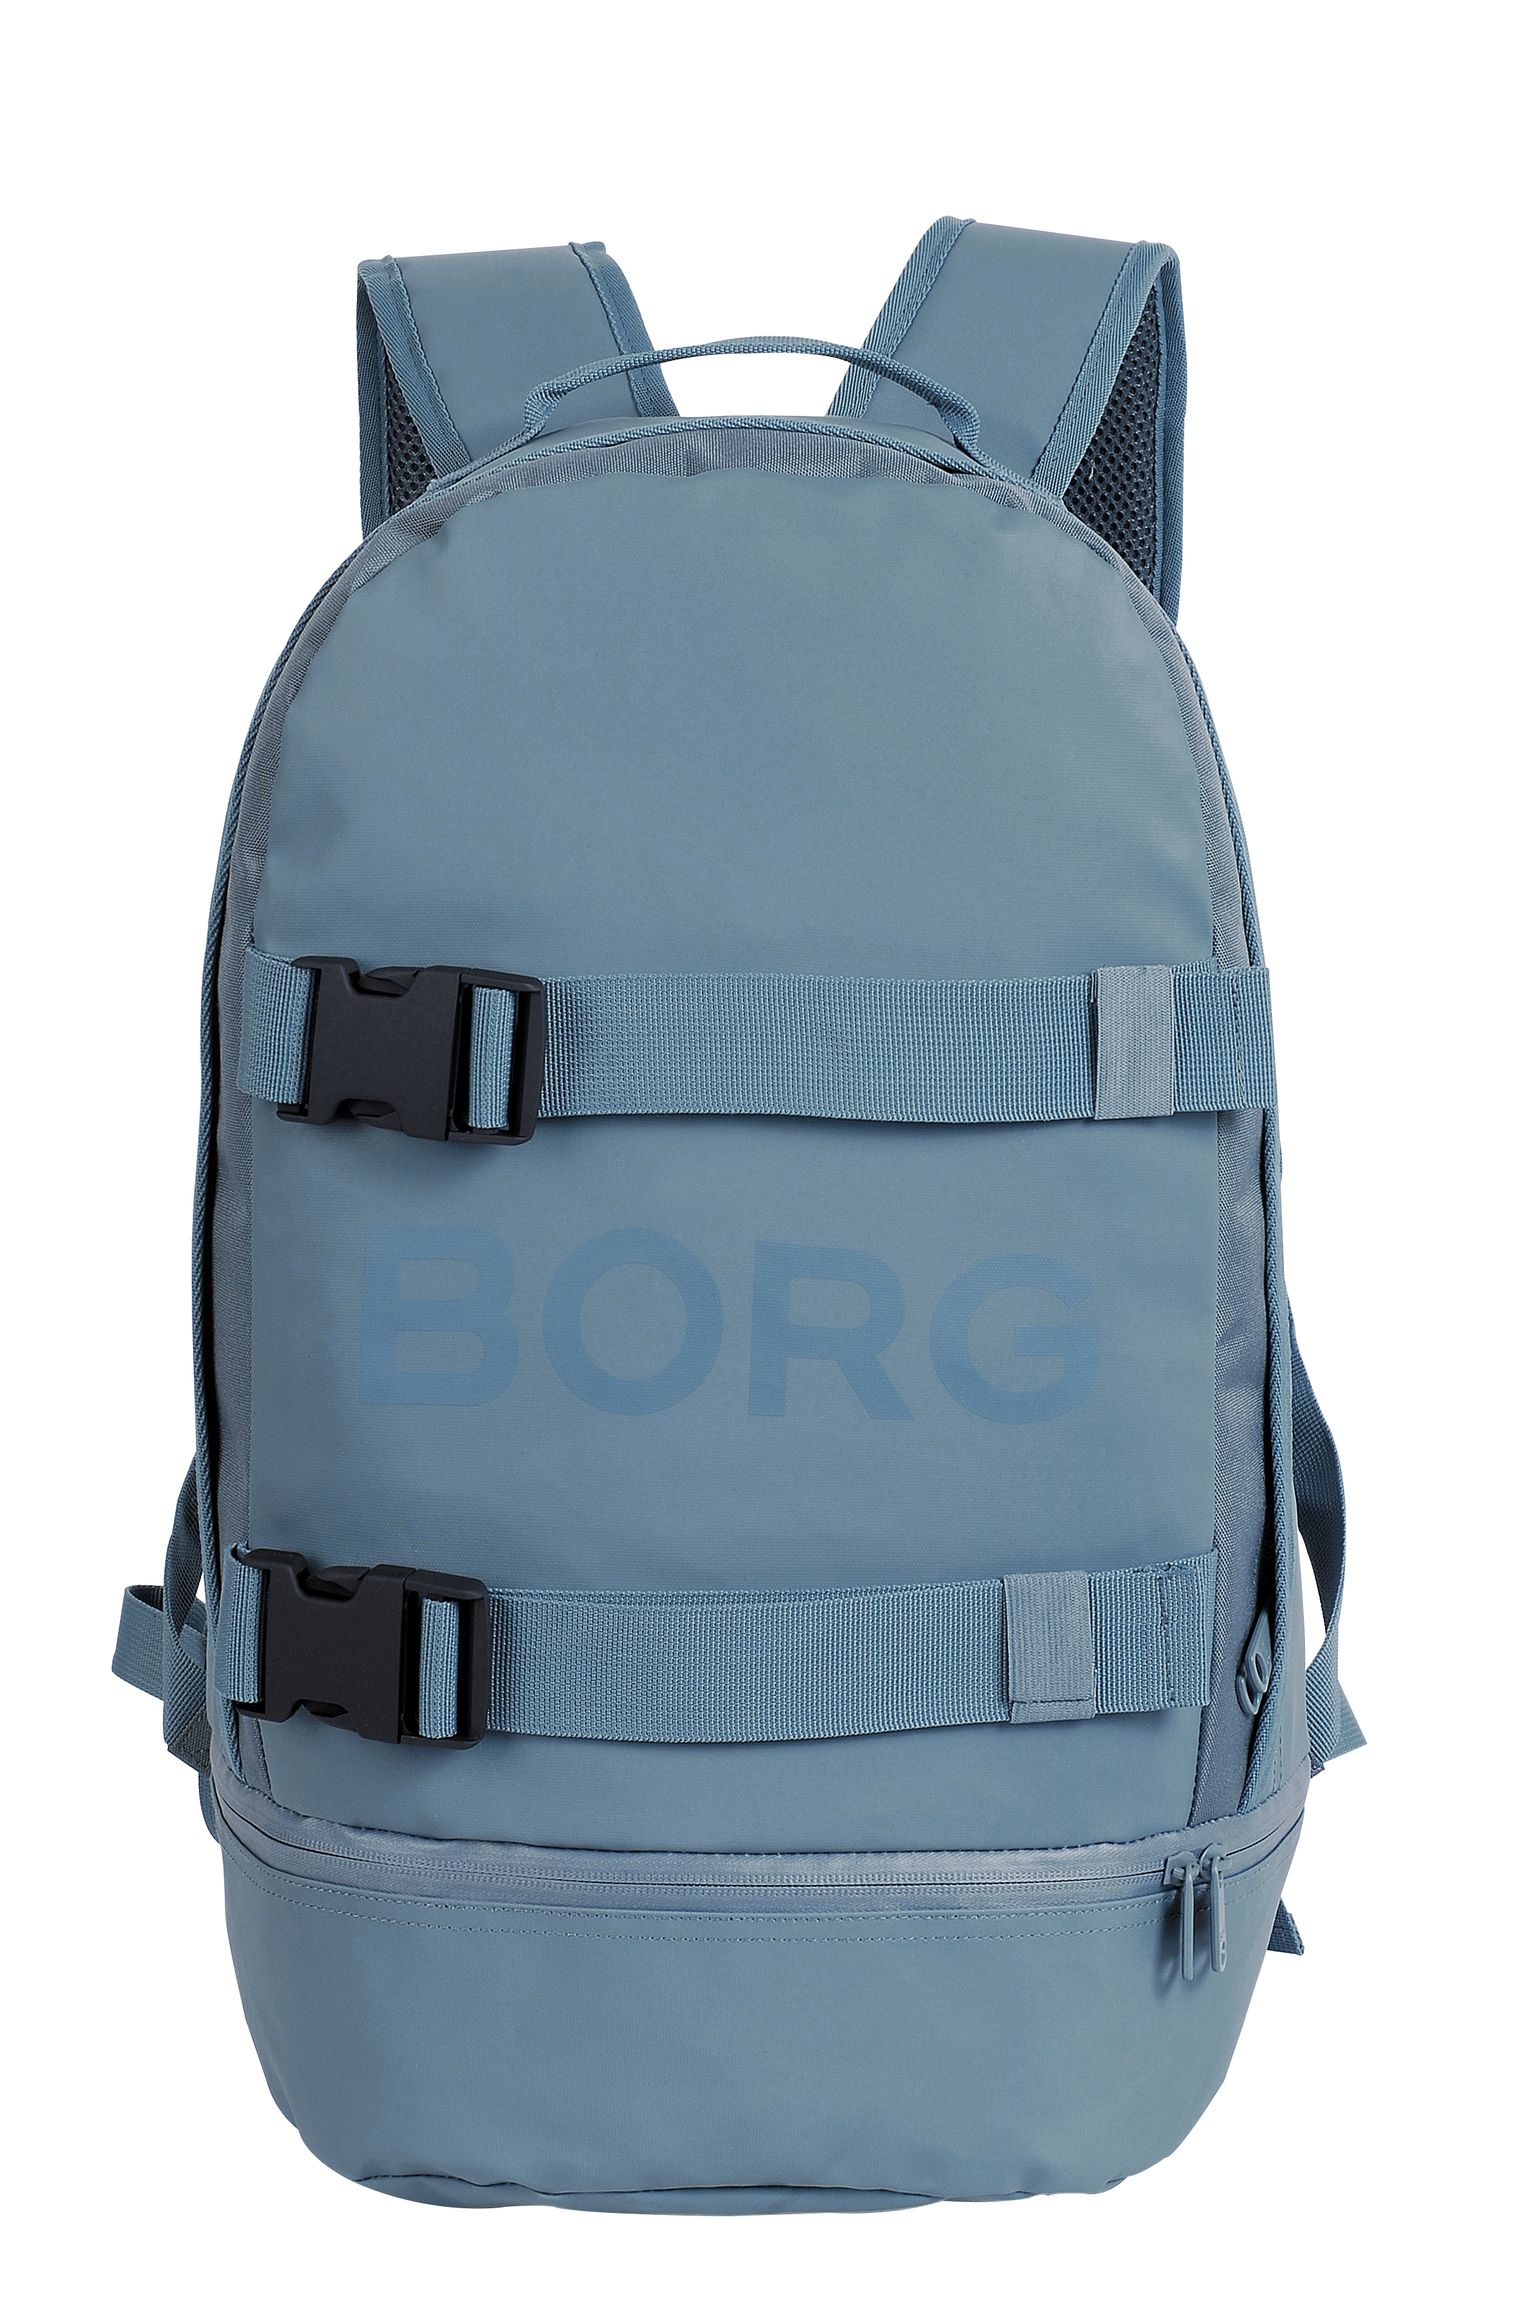 Björn Borg Borg Duffle Backpack Stormy Weather